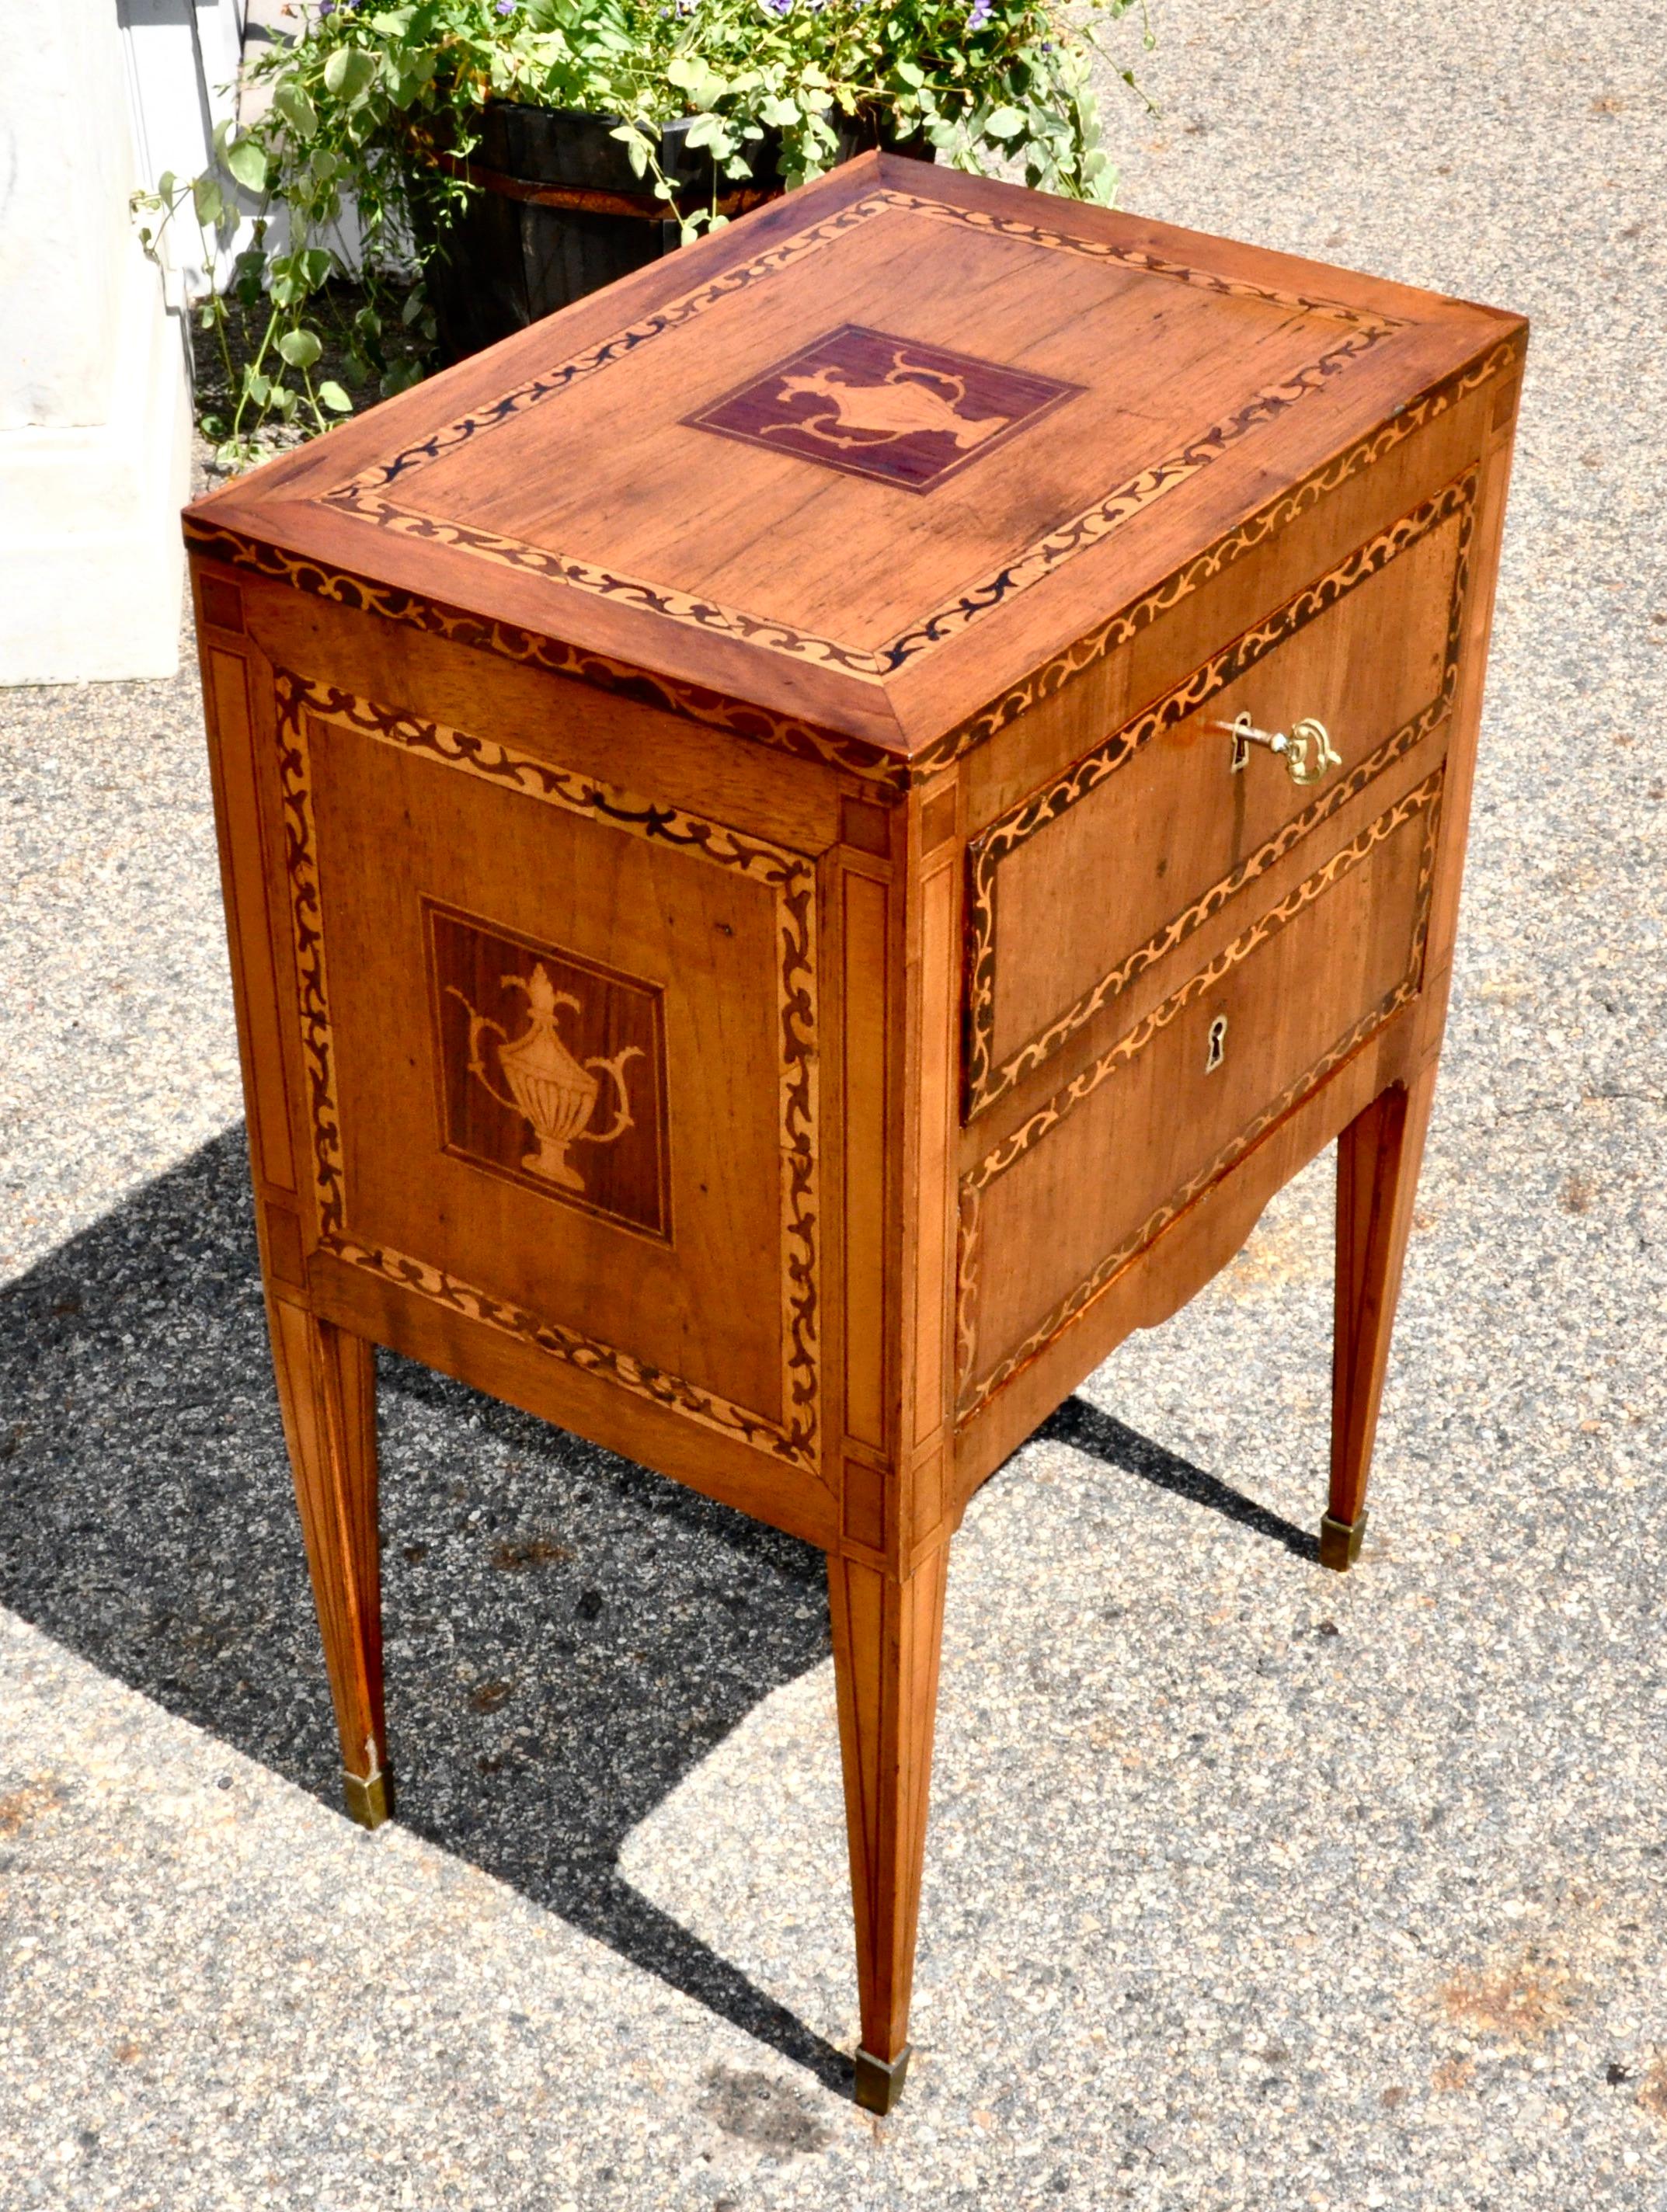 Pair of Northern Italian fruitwood commodes or commodino in marquetry inlay.

Wonderful smaller size suitable as nightstands or end tables. Neoclassical urn inlay and running dog motif.